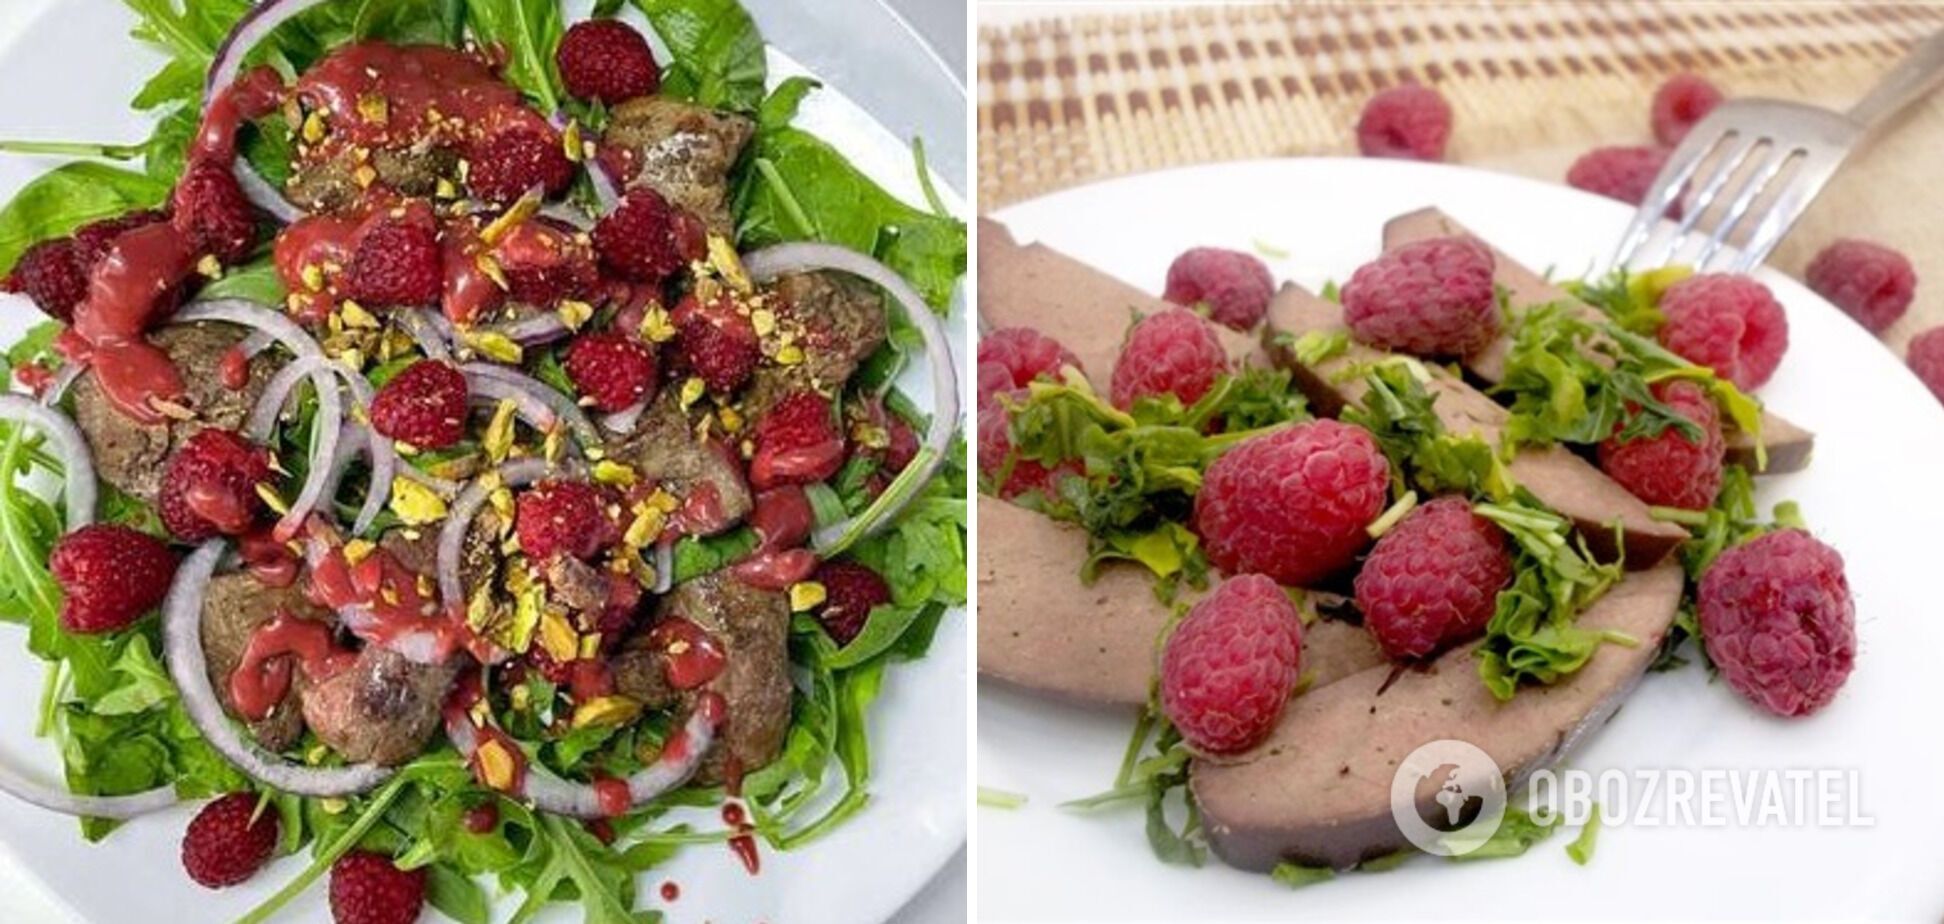 Salad with liver and raspberries